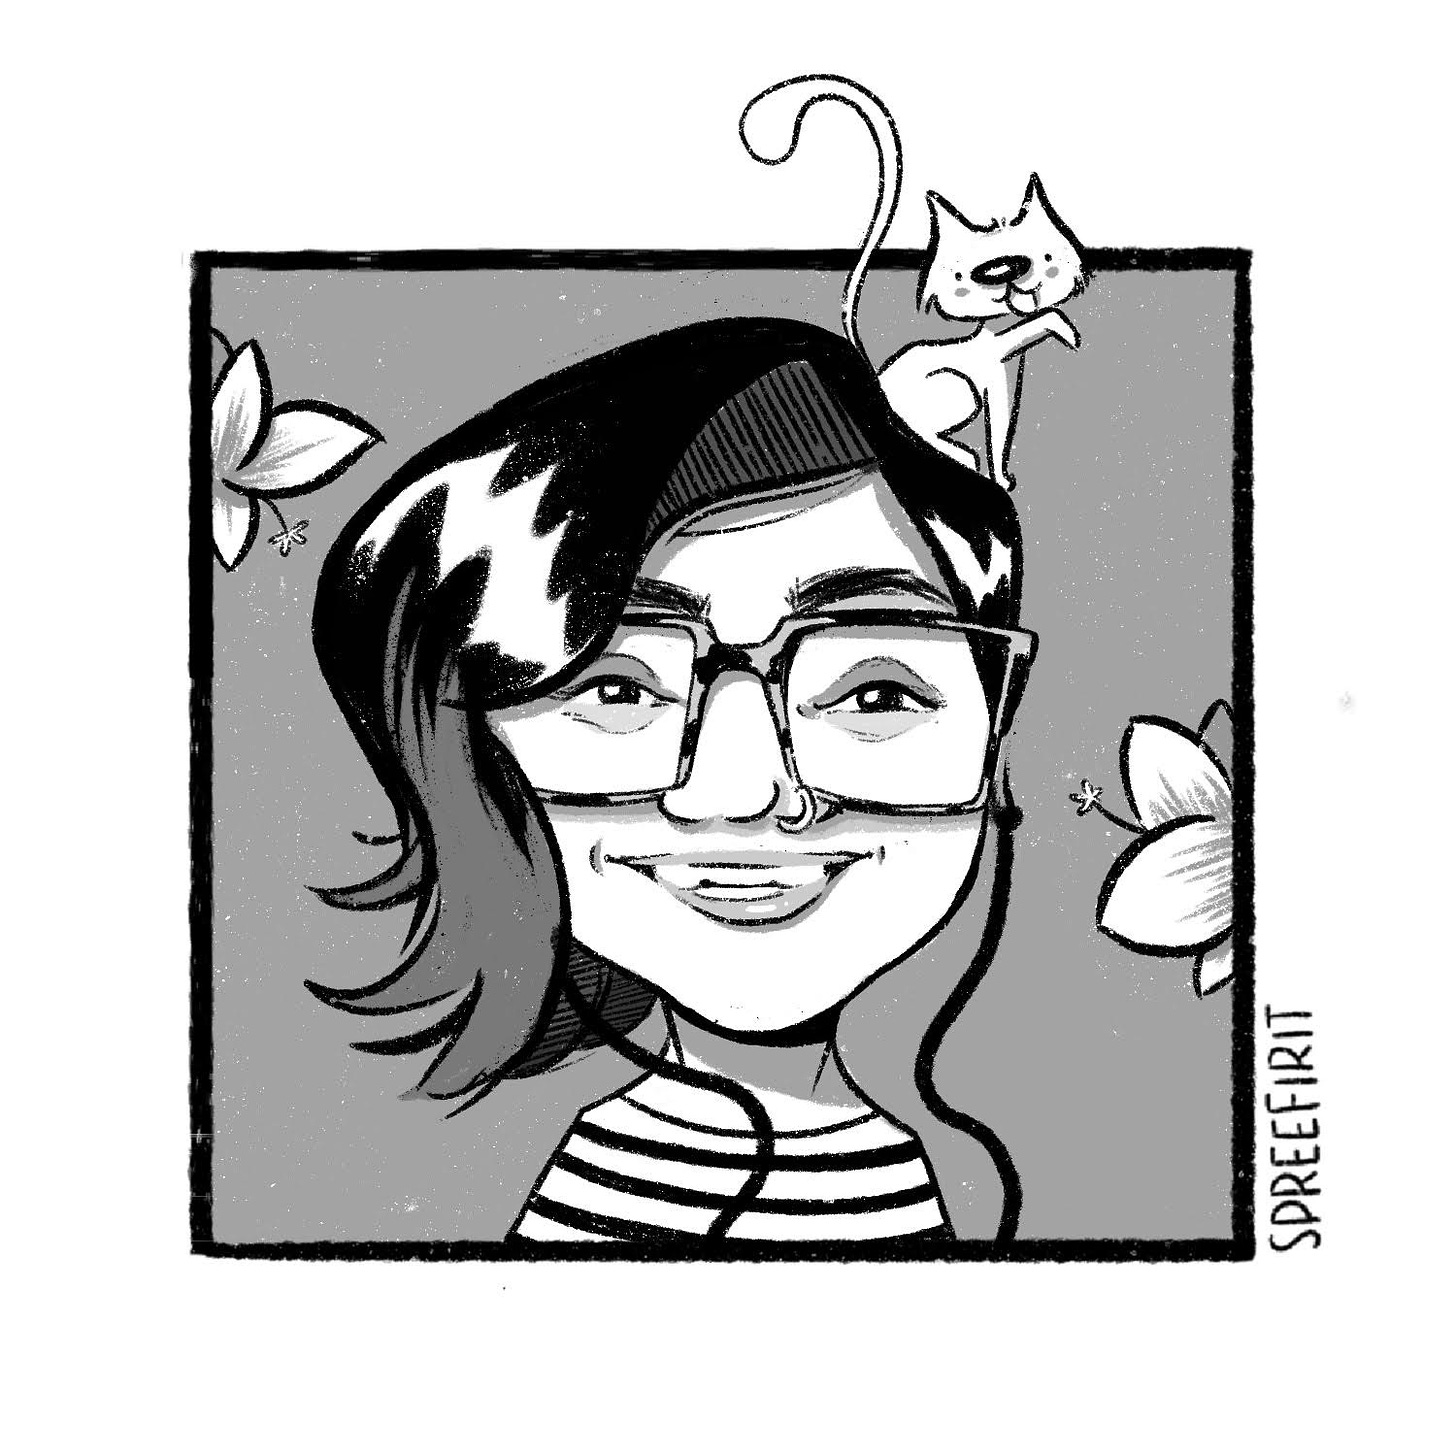 blakc and white illustration of me done by artist spreefirit. I am wearing large flasses ahve a flower in my hair and a cat on my head. 